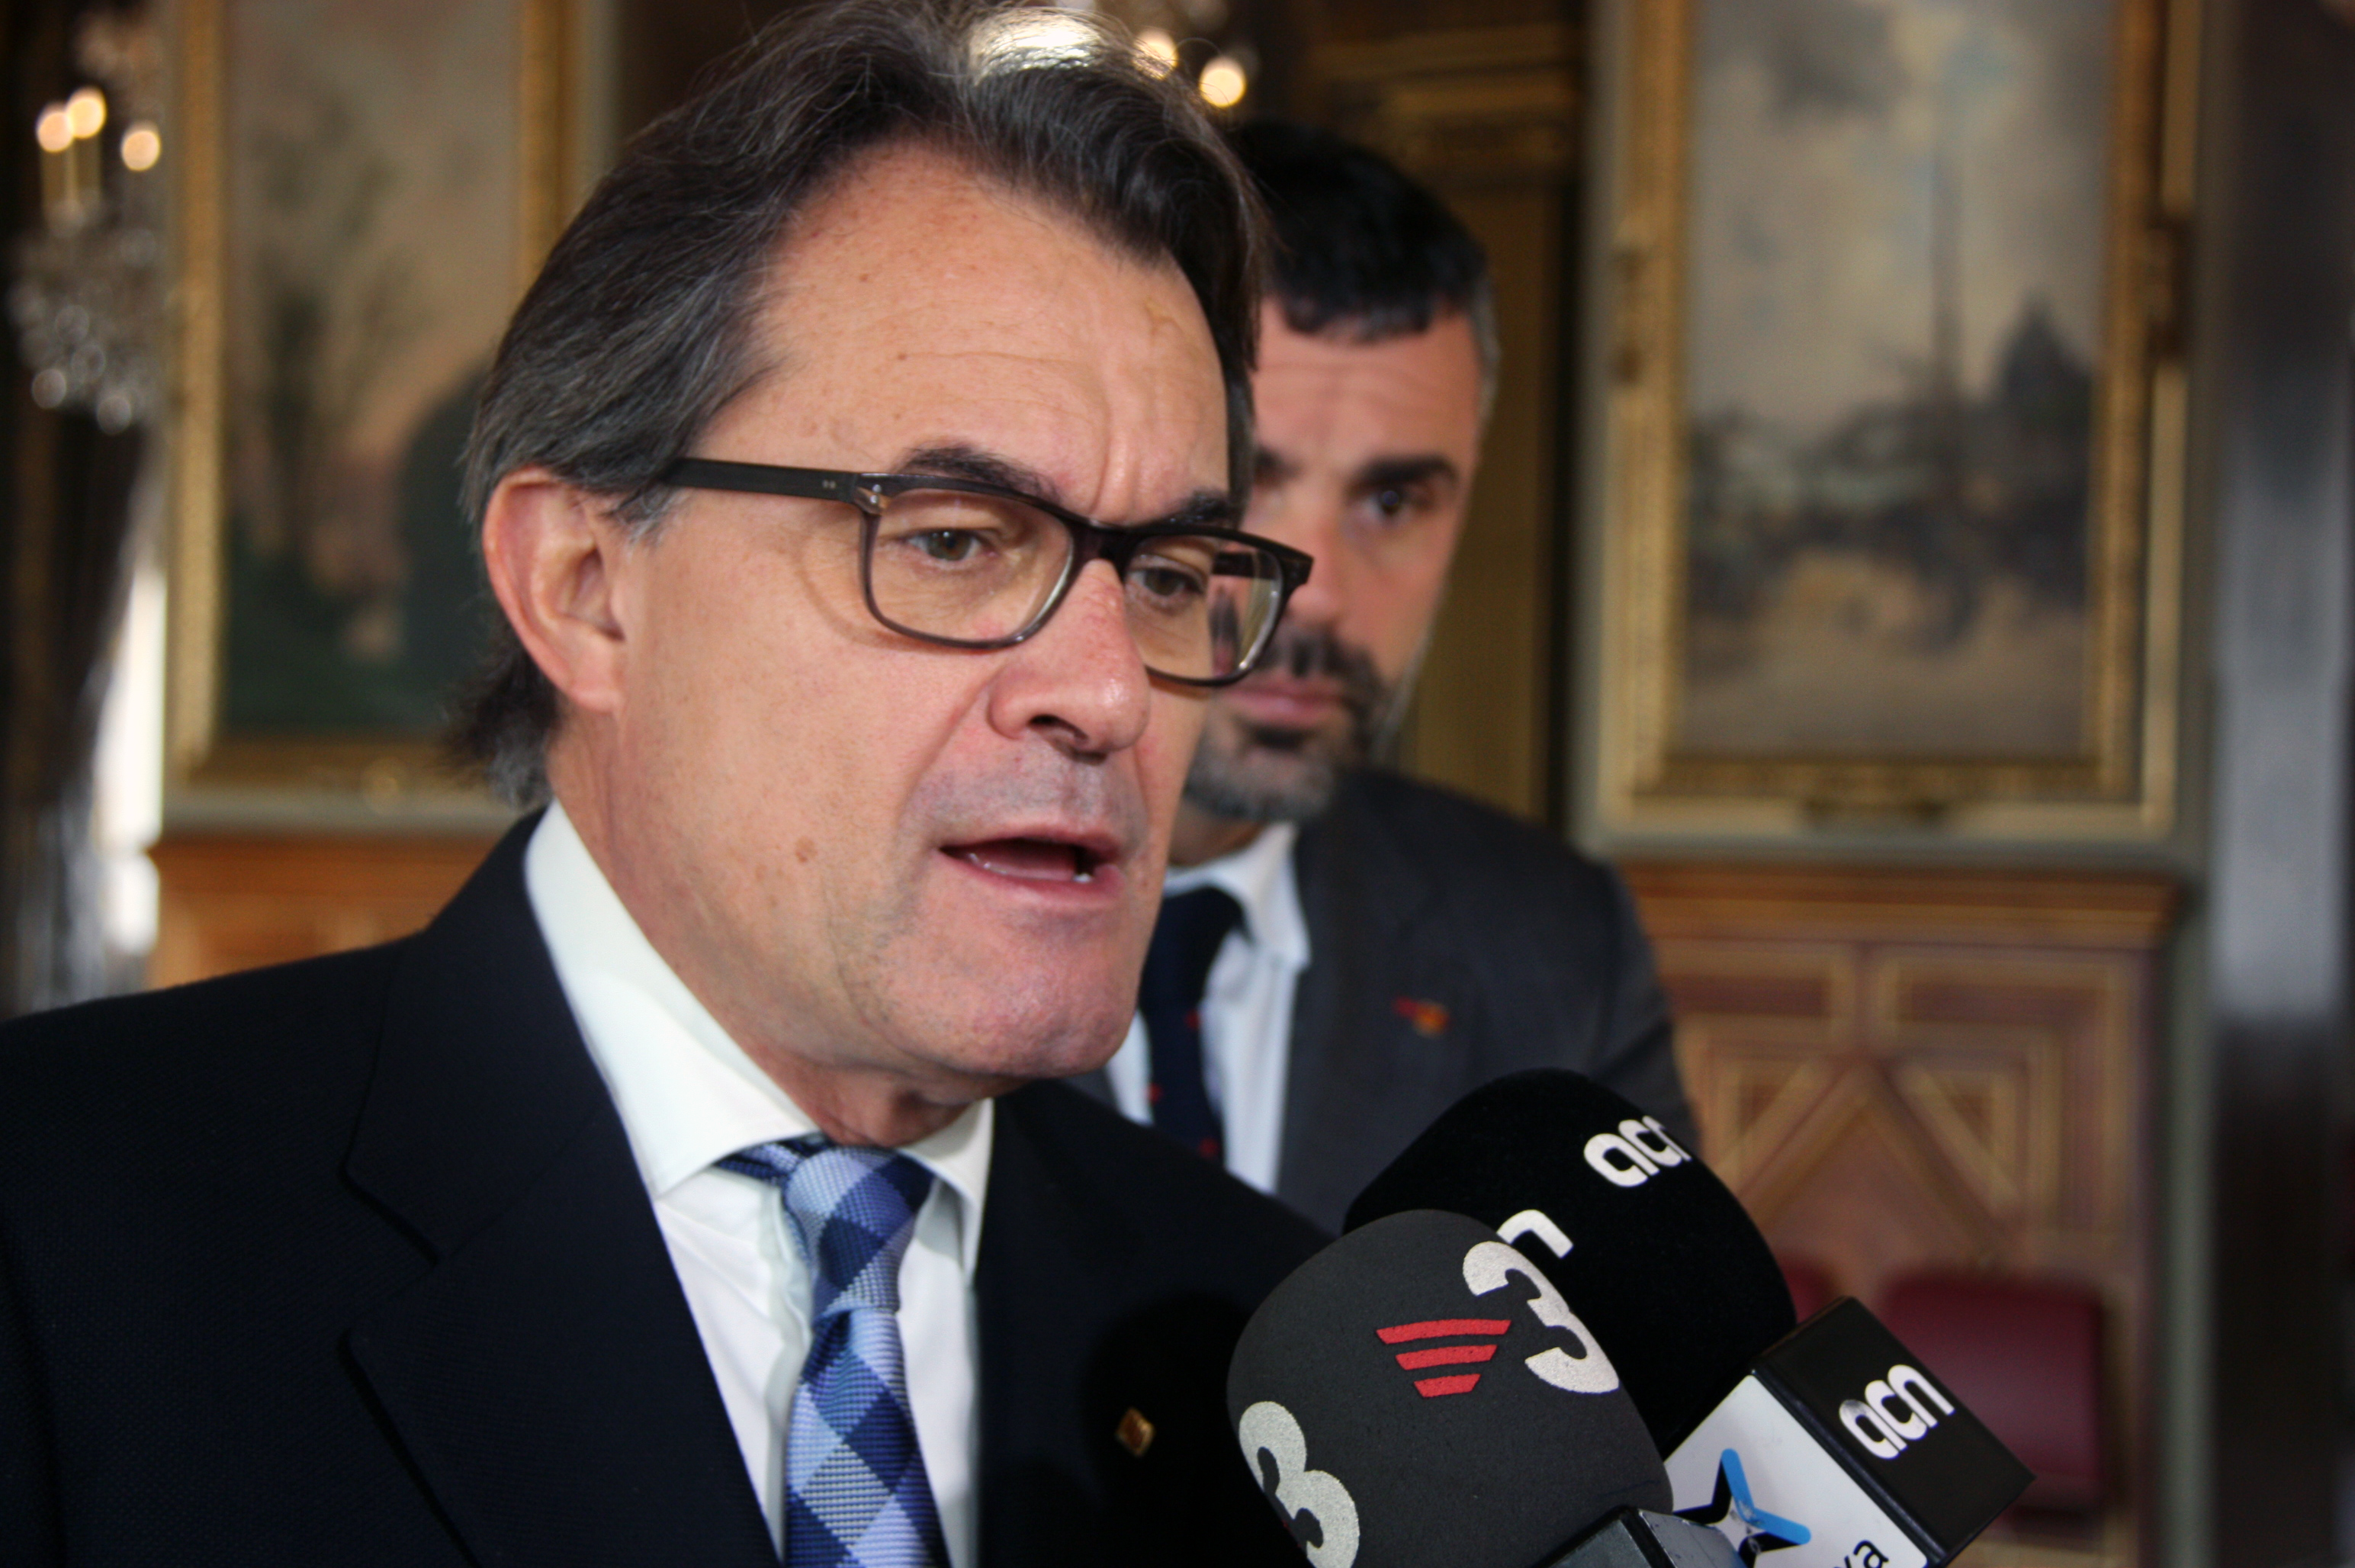 Former Catalan President, Artur Mas at his arrival at Paris' Town Hall in a picture from December (by ACN)